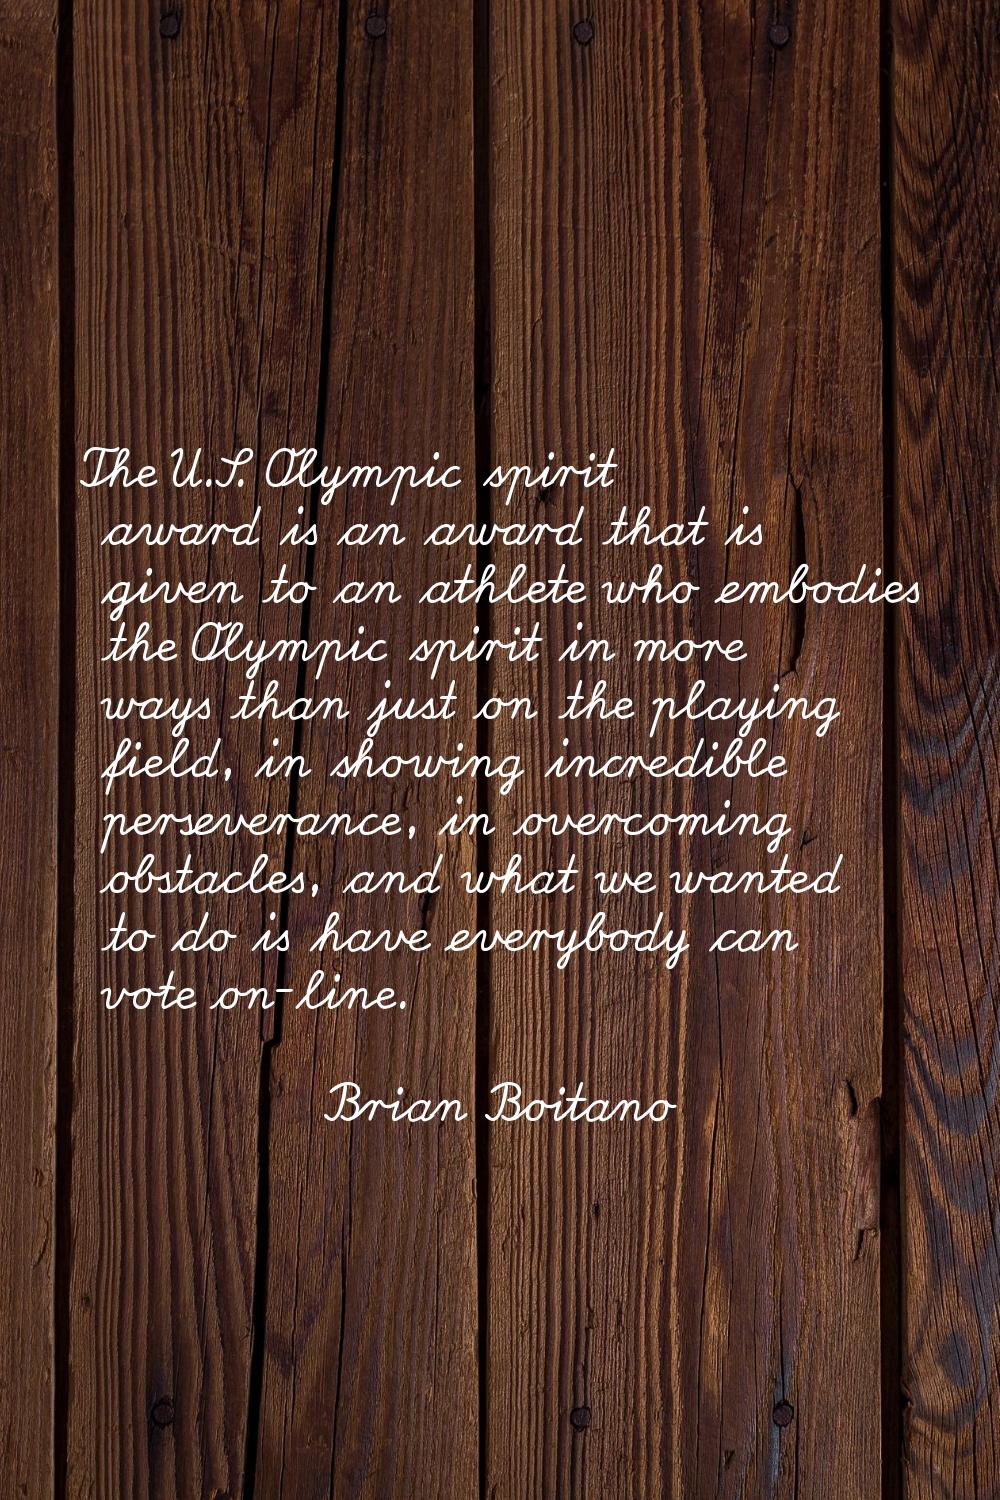 The U.S. Olympic spirit award is an award that is given to an athlete who embodies the Olympic spir